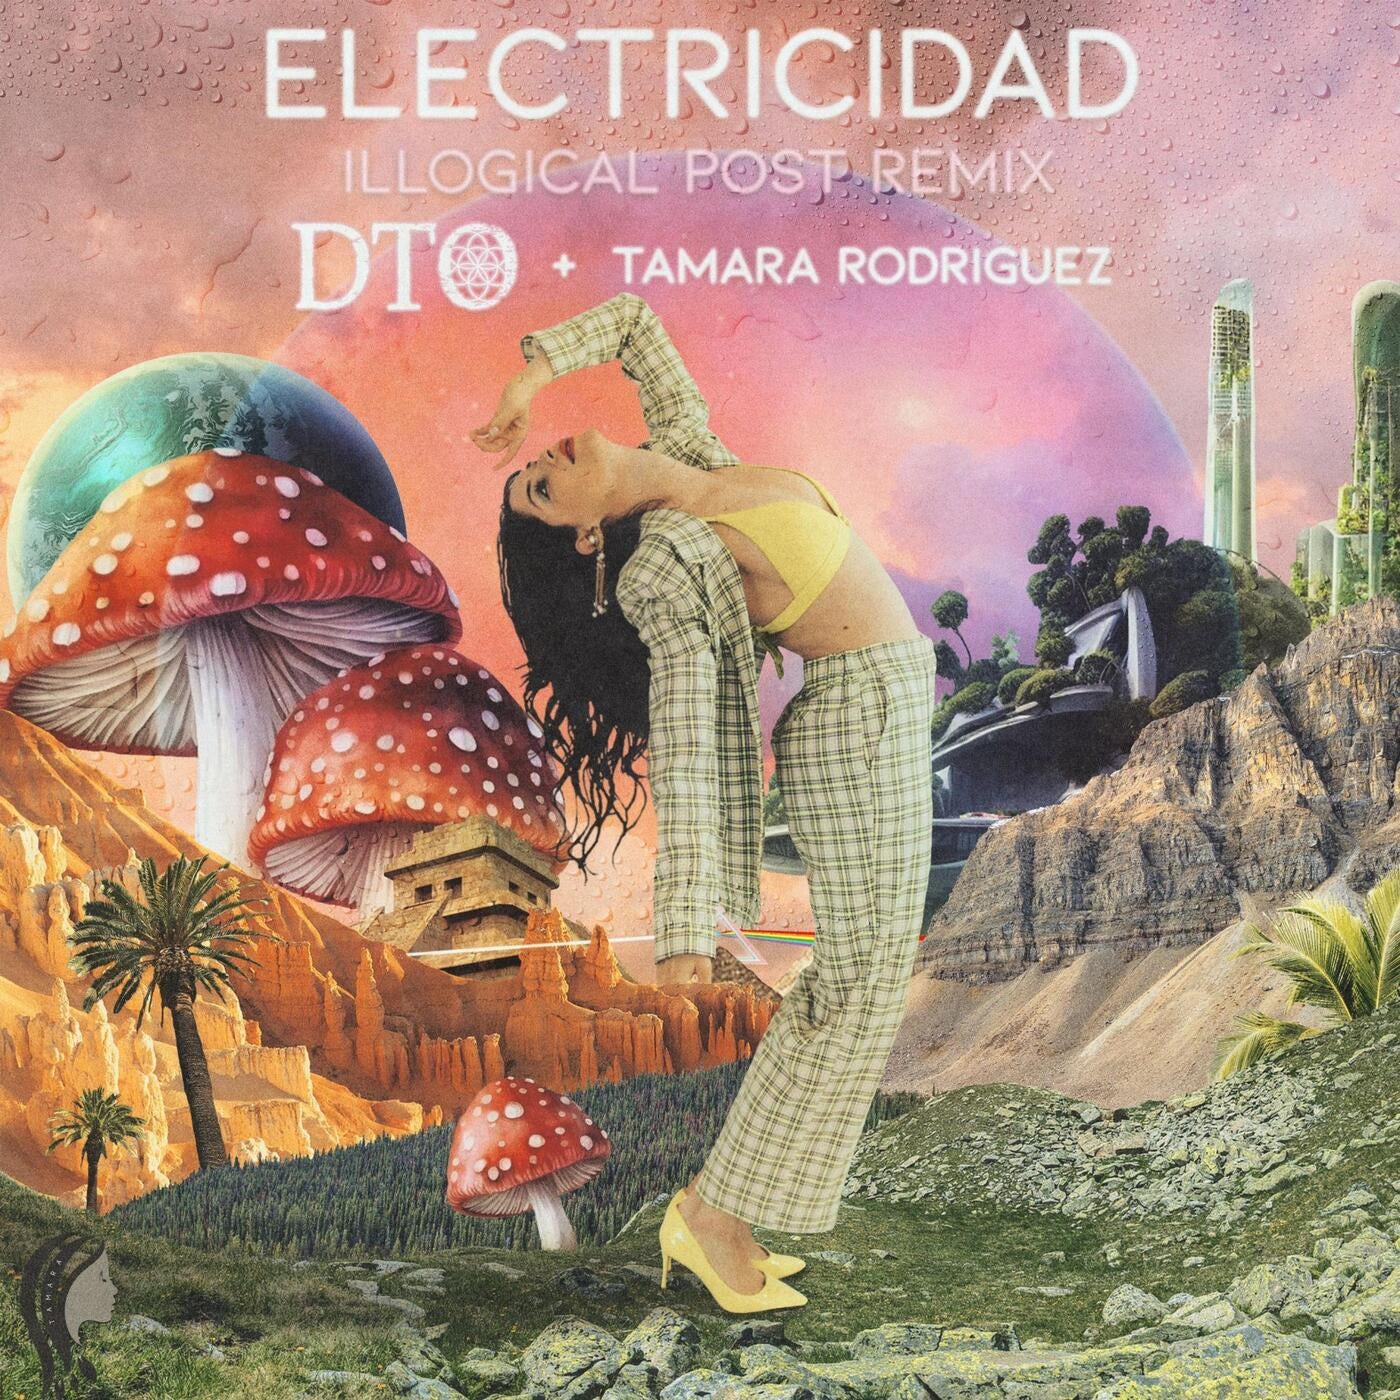 Electricidad (Chill House Mix)